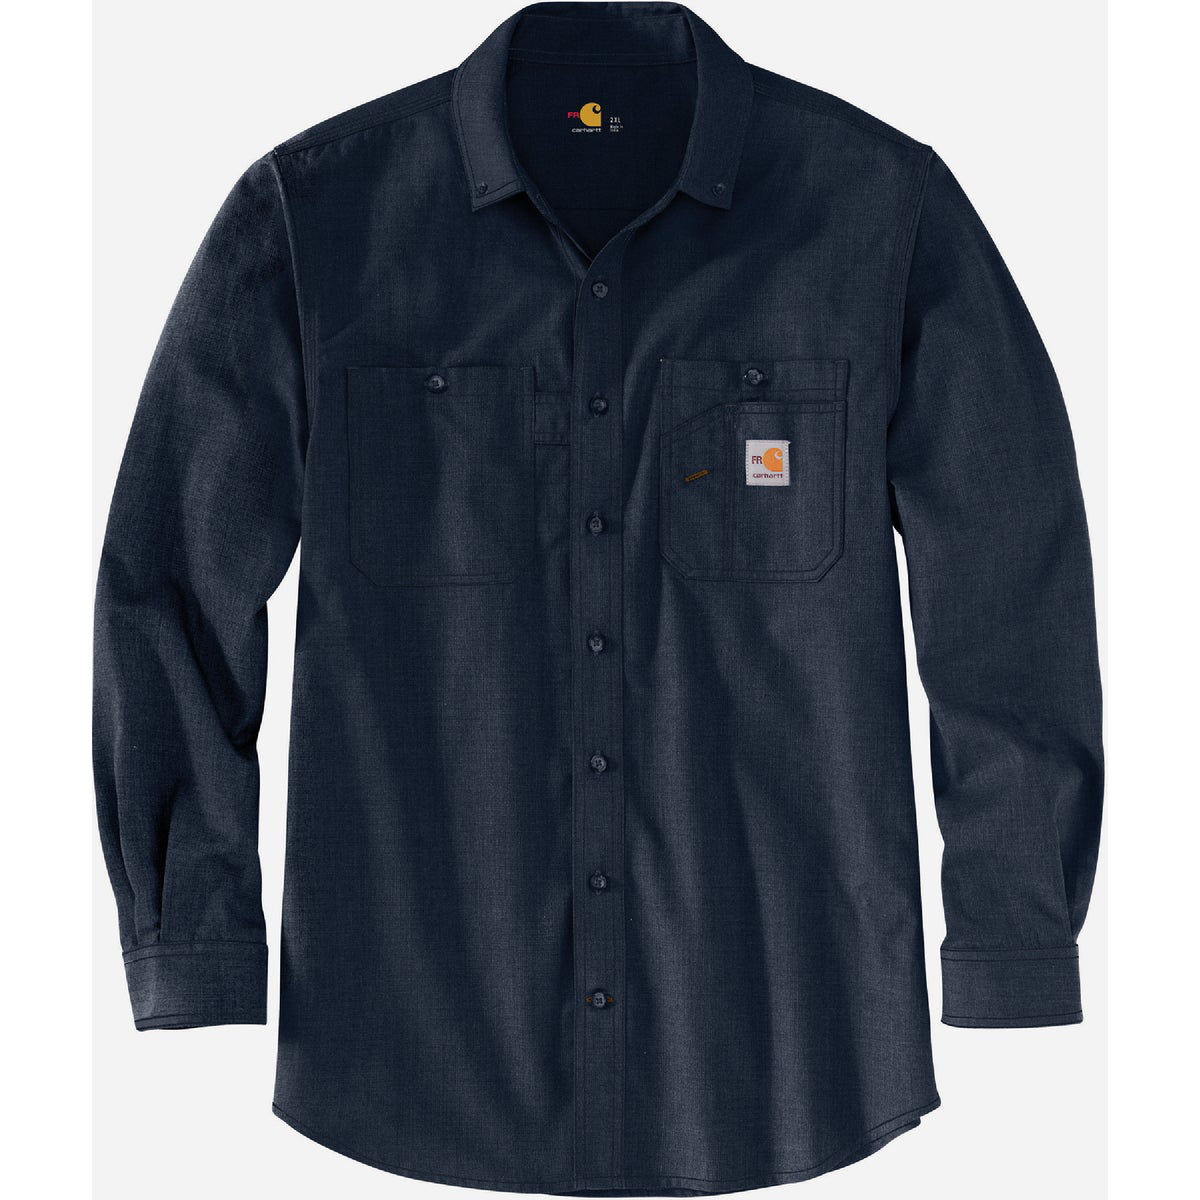 Carhartt Force Flame-Resistant Long Sleeve T-Shirt